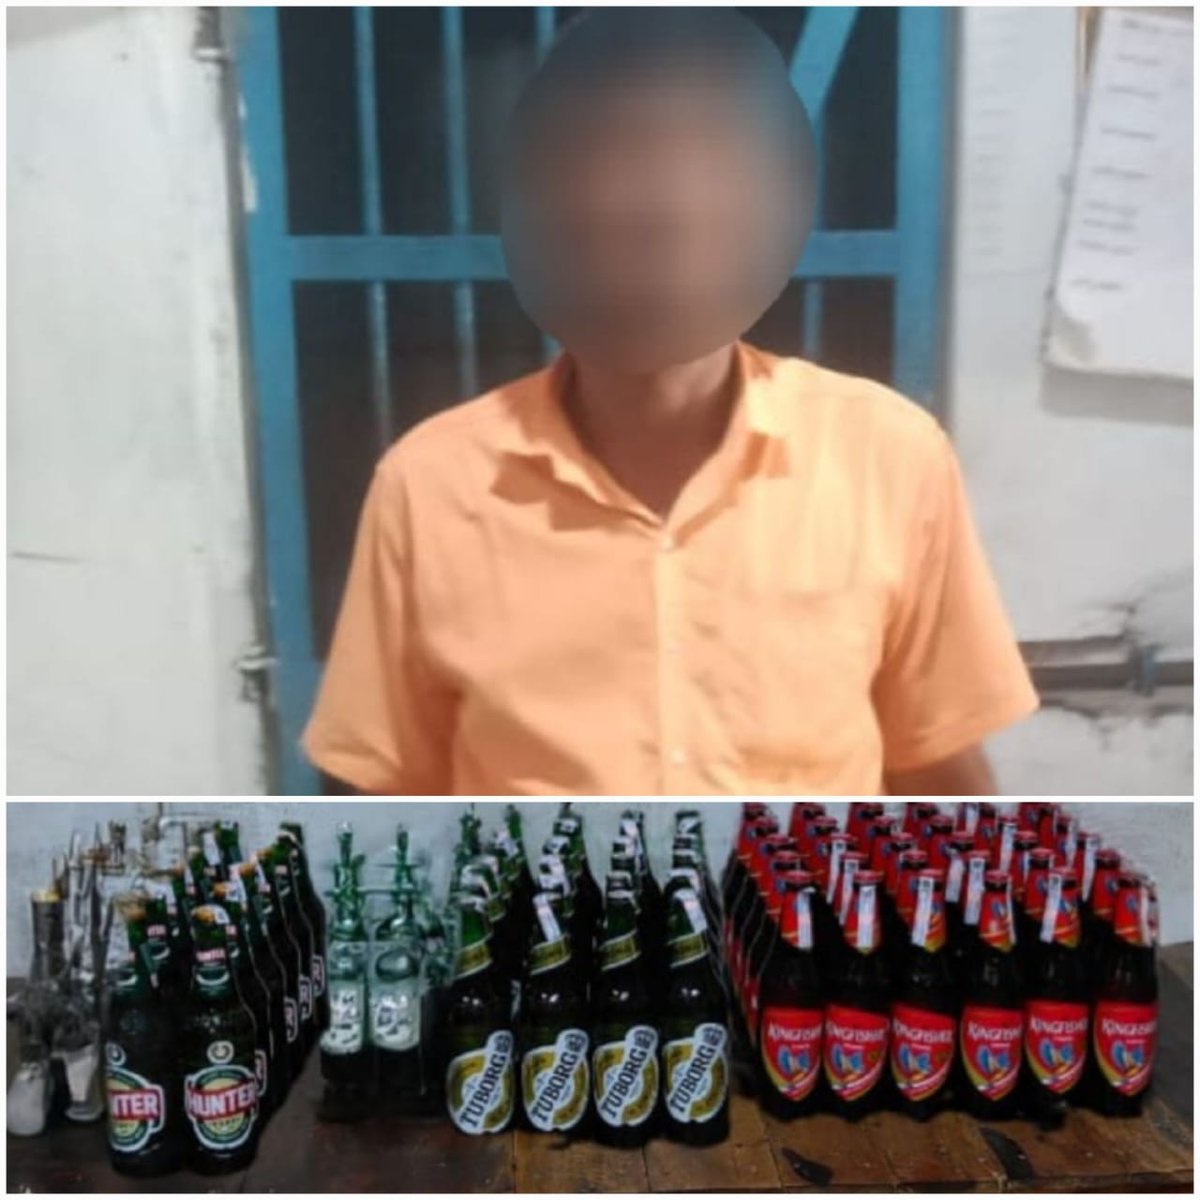 During an Excise raid, Sadar PS has seized 46.800 ltr Foreign Liquor from exclusive illegal possession of one accused person. The accused person has been arrested in Sadar PS case no 208/24 U/s 52(a) Odisha Excise Act, and further investigation is on.